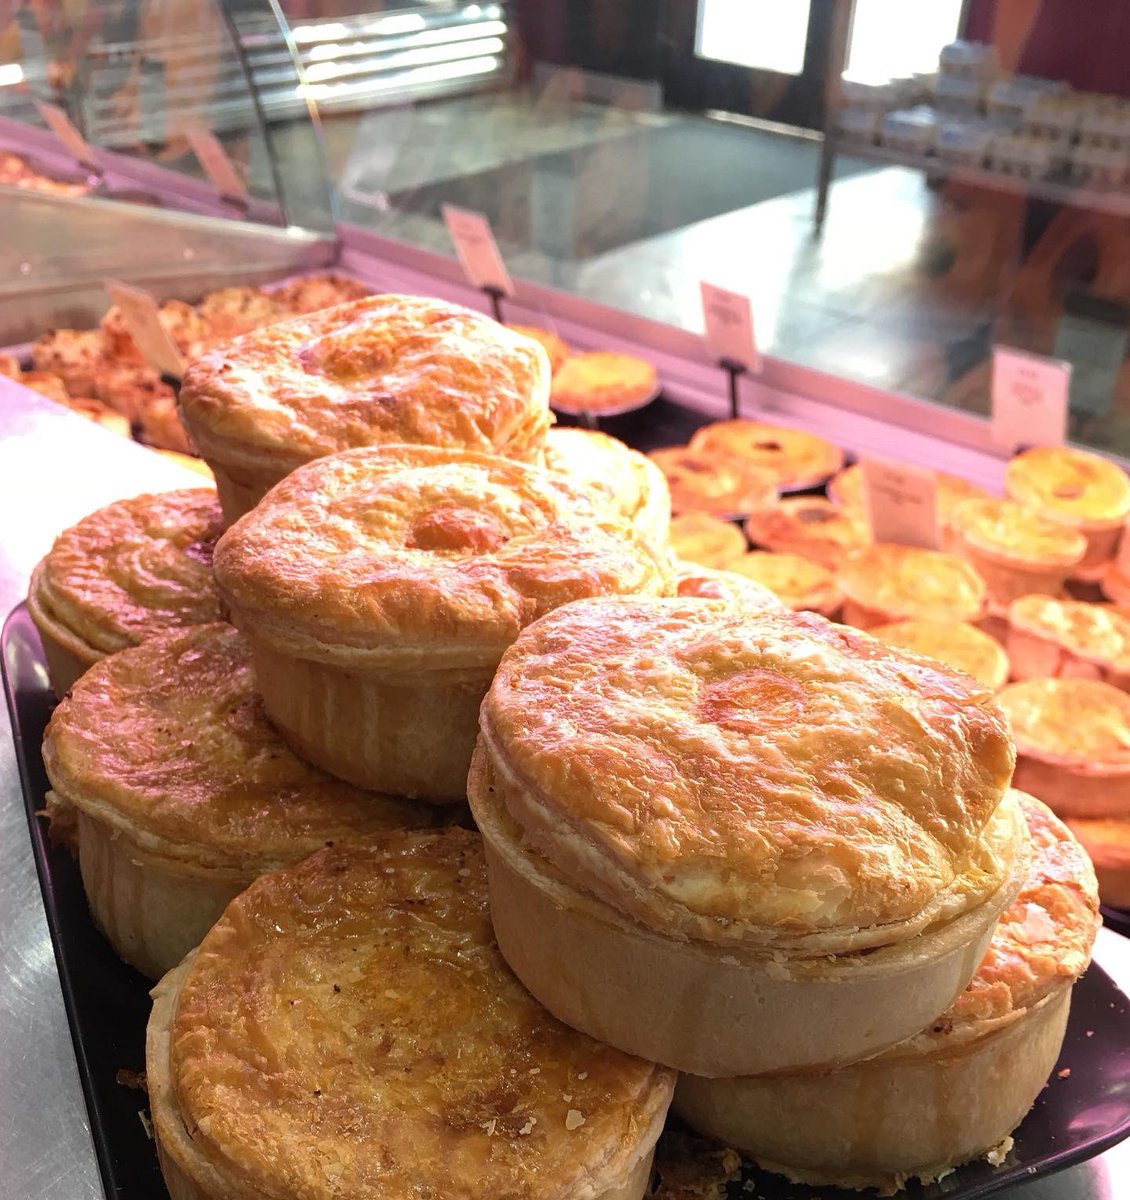 🥧 It’s #BritishPieWeek 🥧 Here’s two to start the day with, our Breakfast Pie and Bacon & Egg pie 🥓🍳😋 #NationalPieWeek #thomasons #keswick